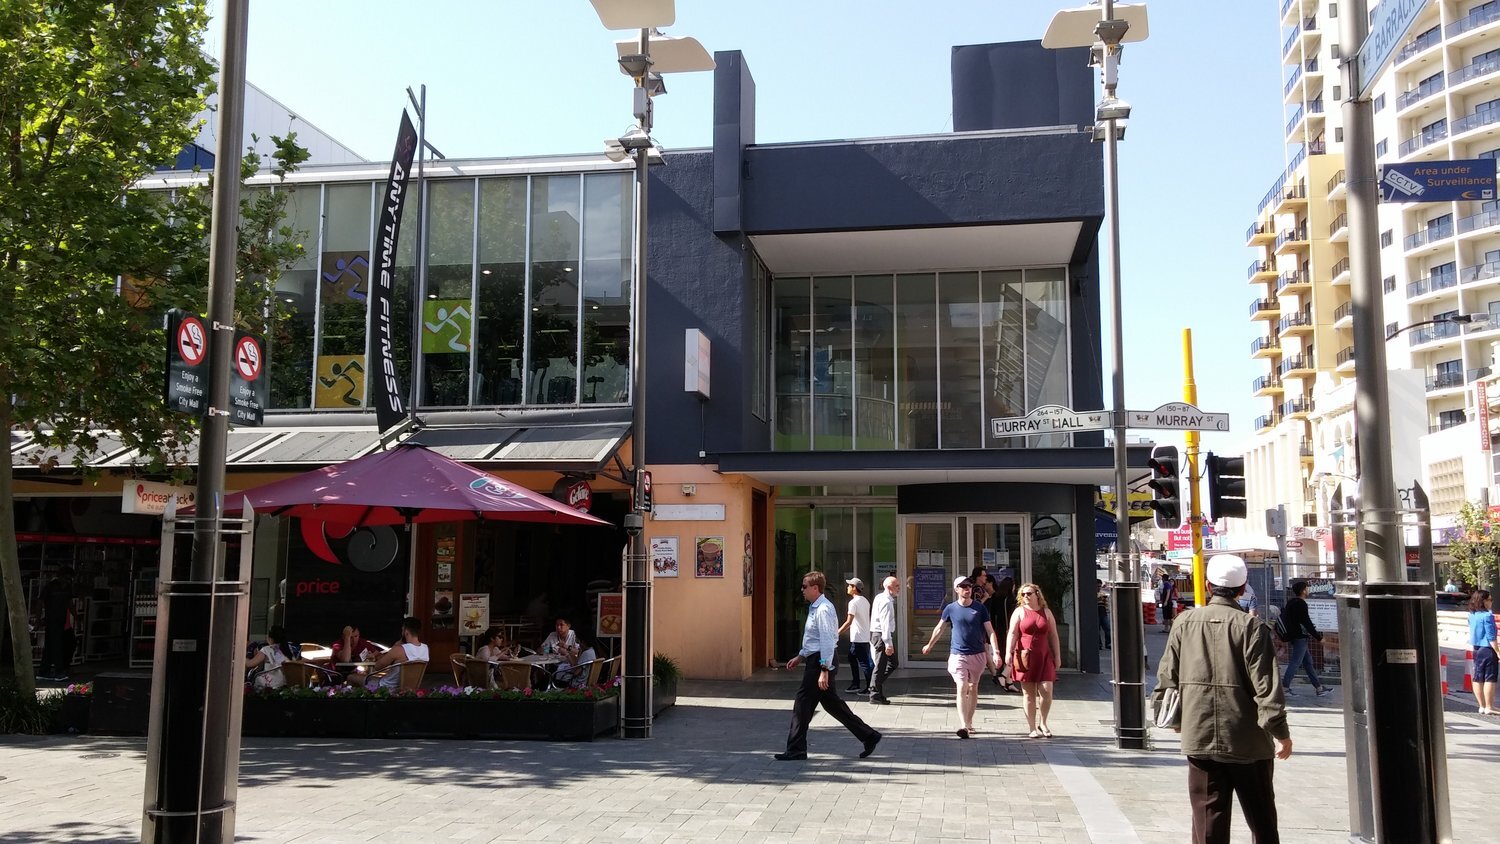  SITE OF FORMER EMPIRE BUILDINGS, MURRAY STREET, PERTH, 2015  Image owned by Museum of Perth 